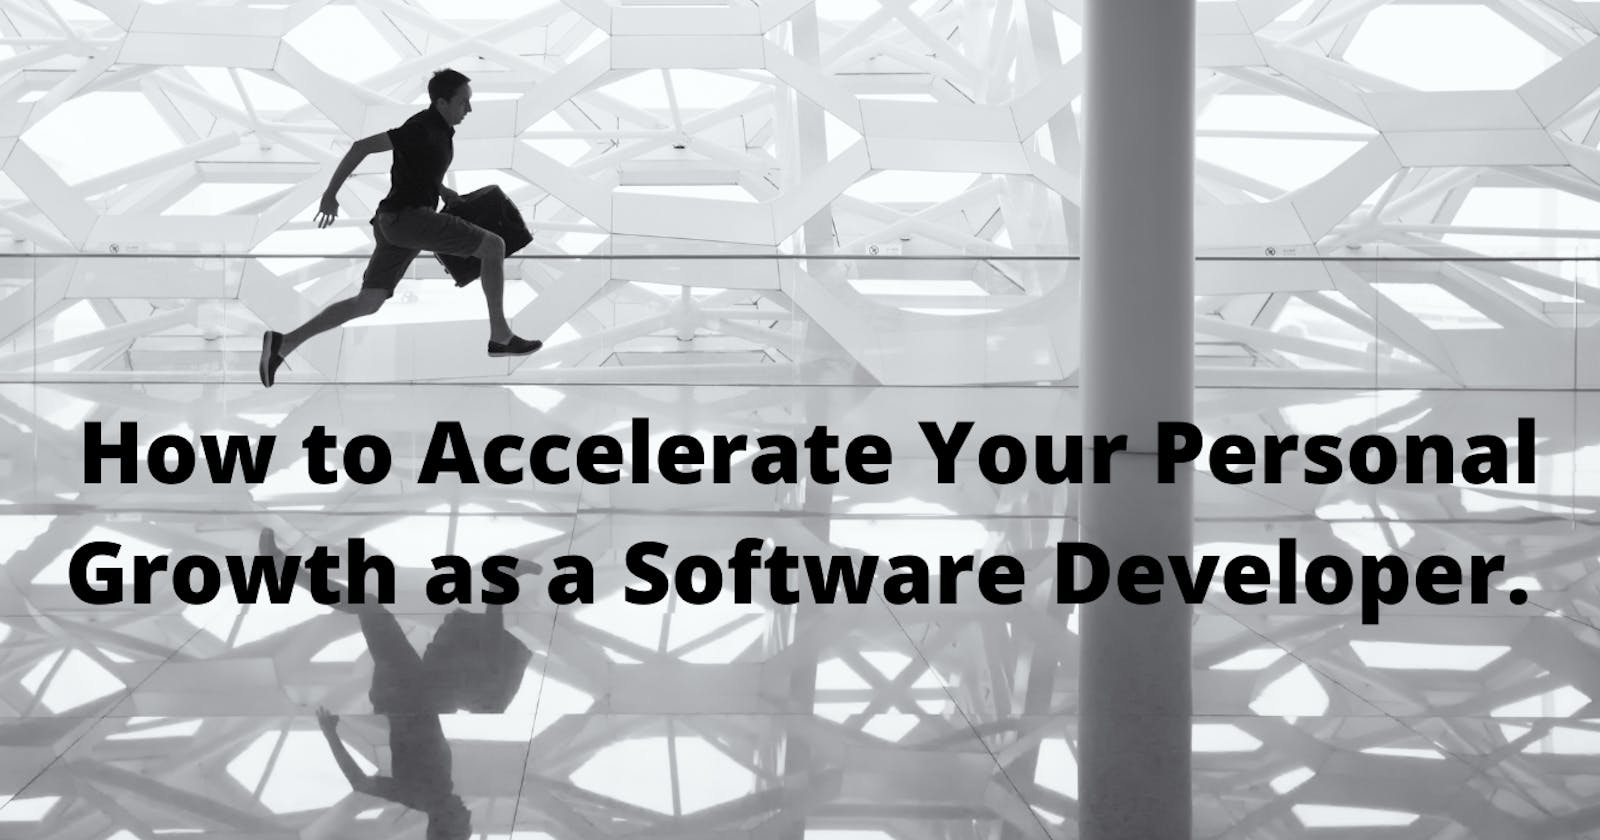 How to Accelerate Your Personal Growth as a Software Developer